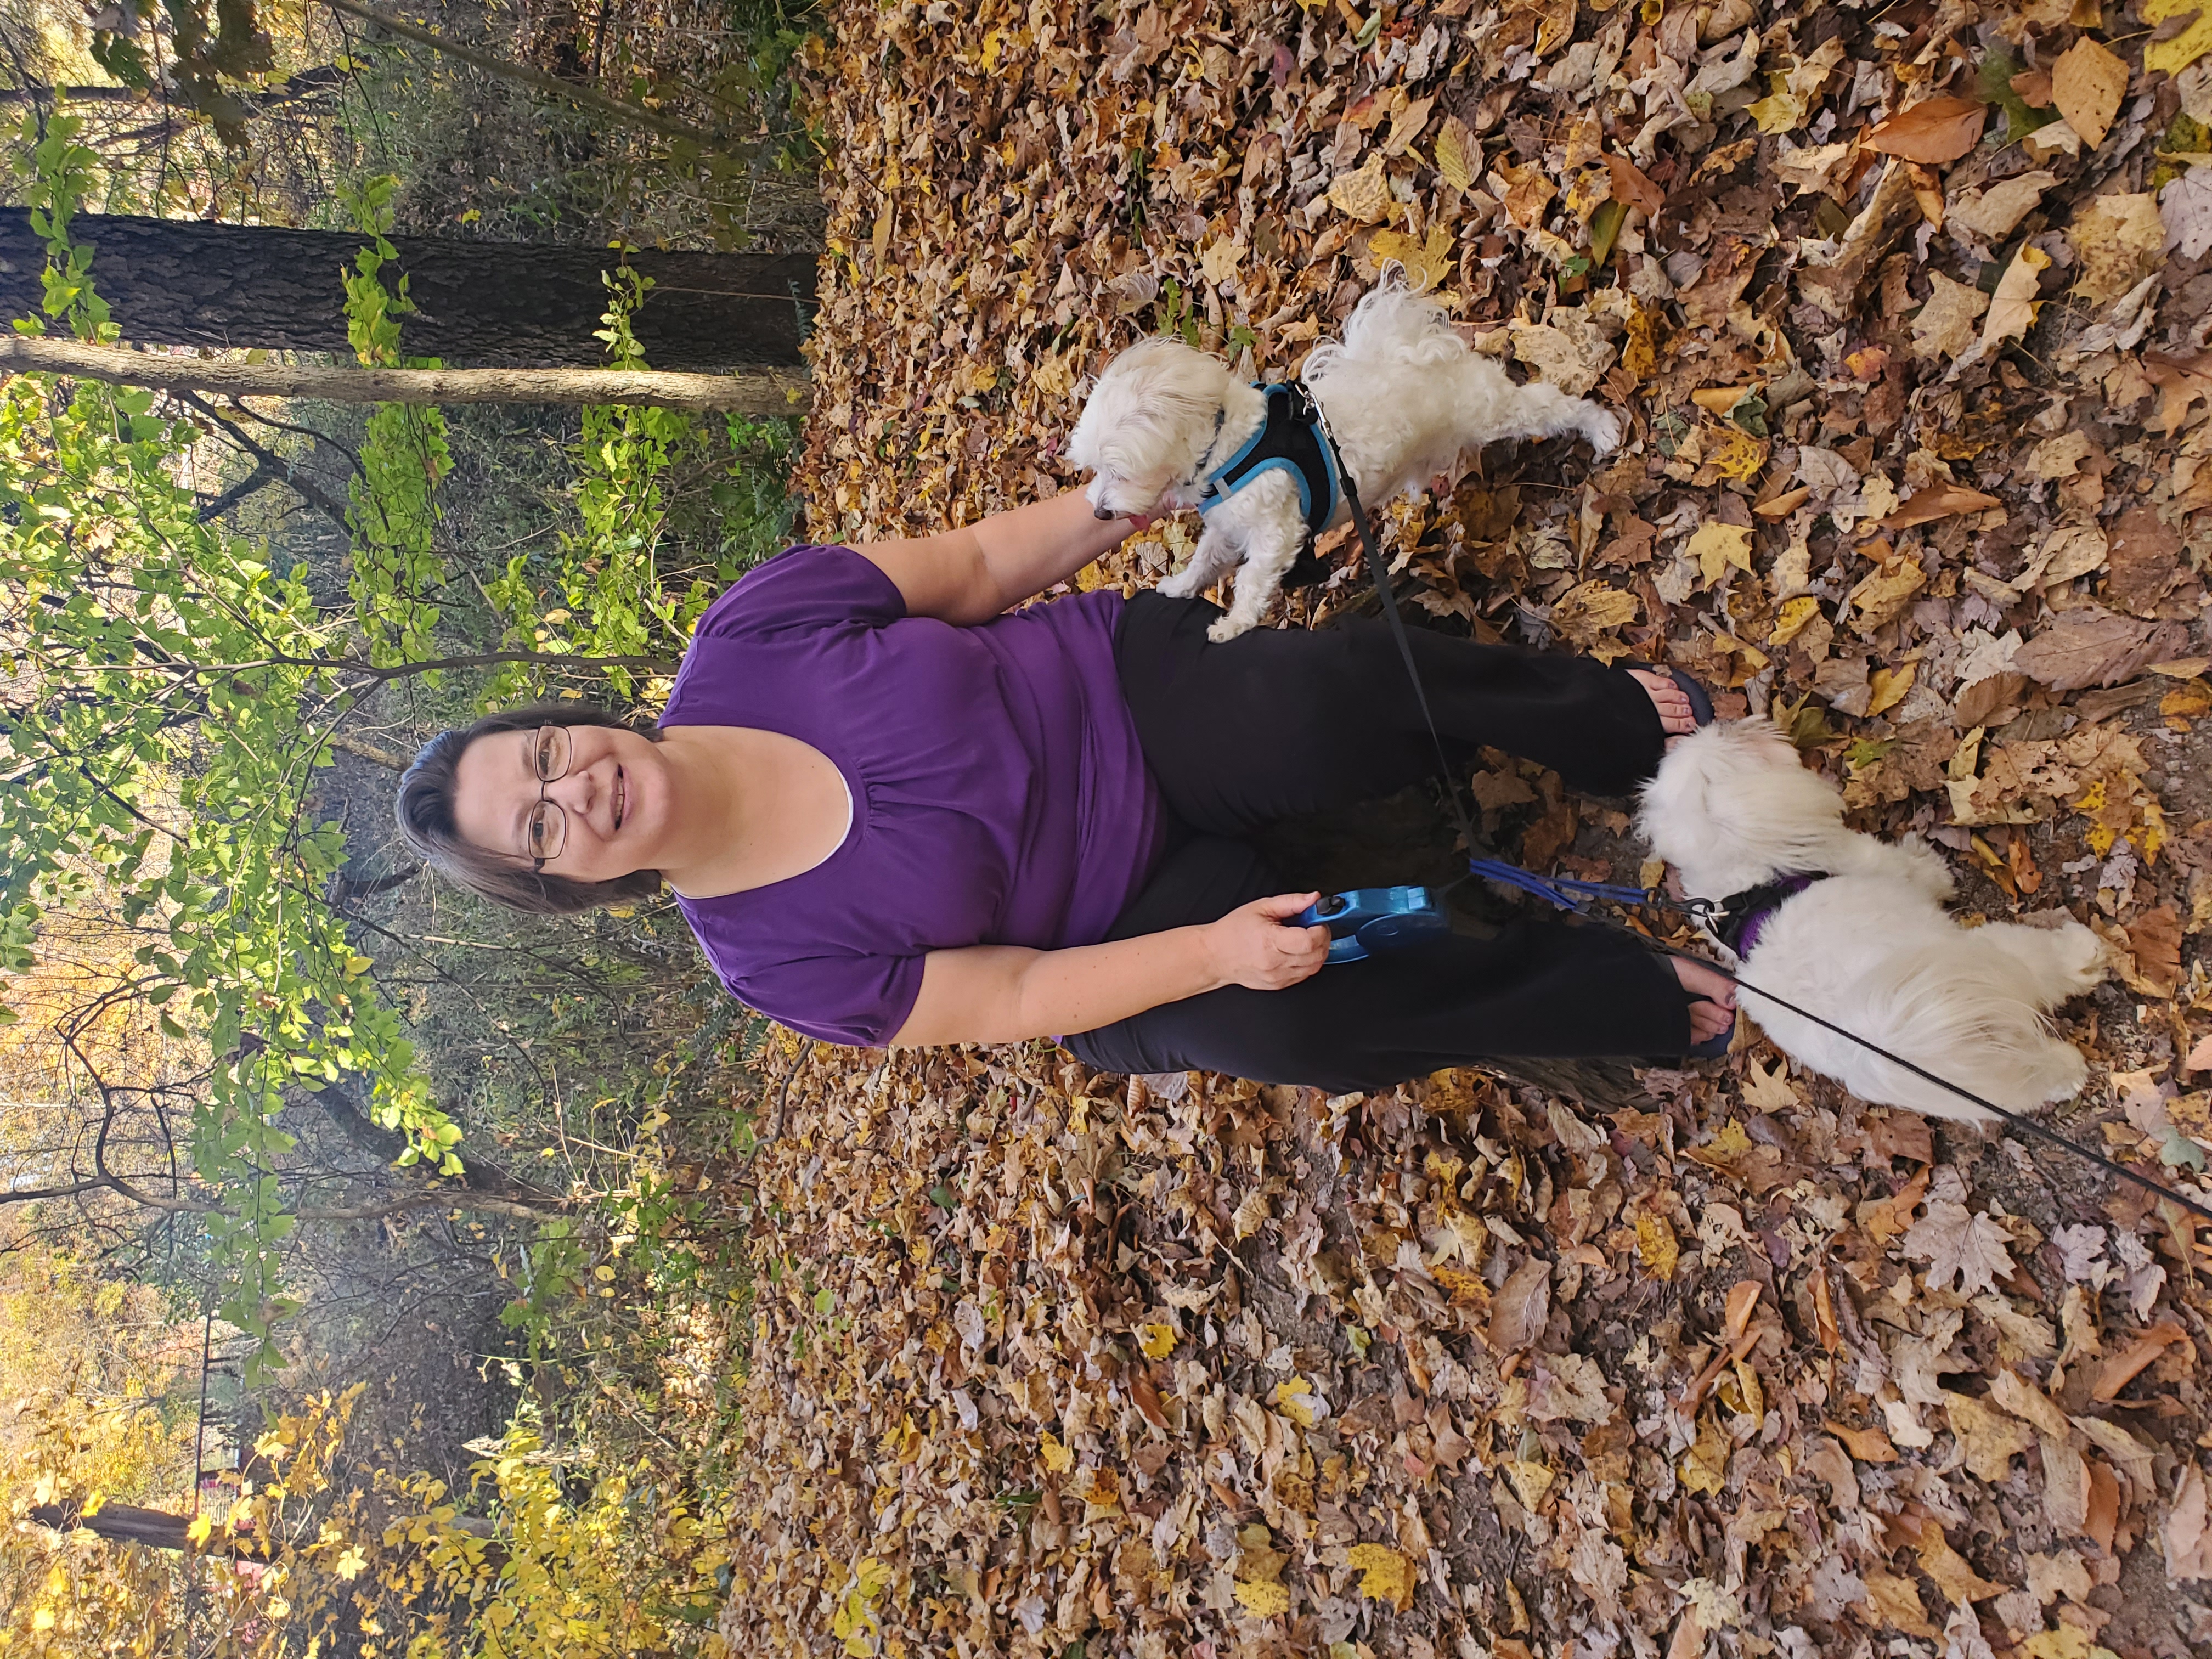 Sharon Miller smiling in the woods with her two dogs